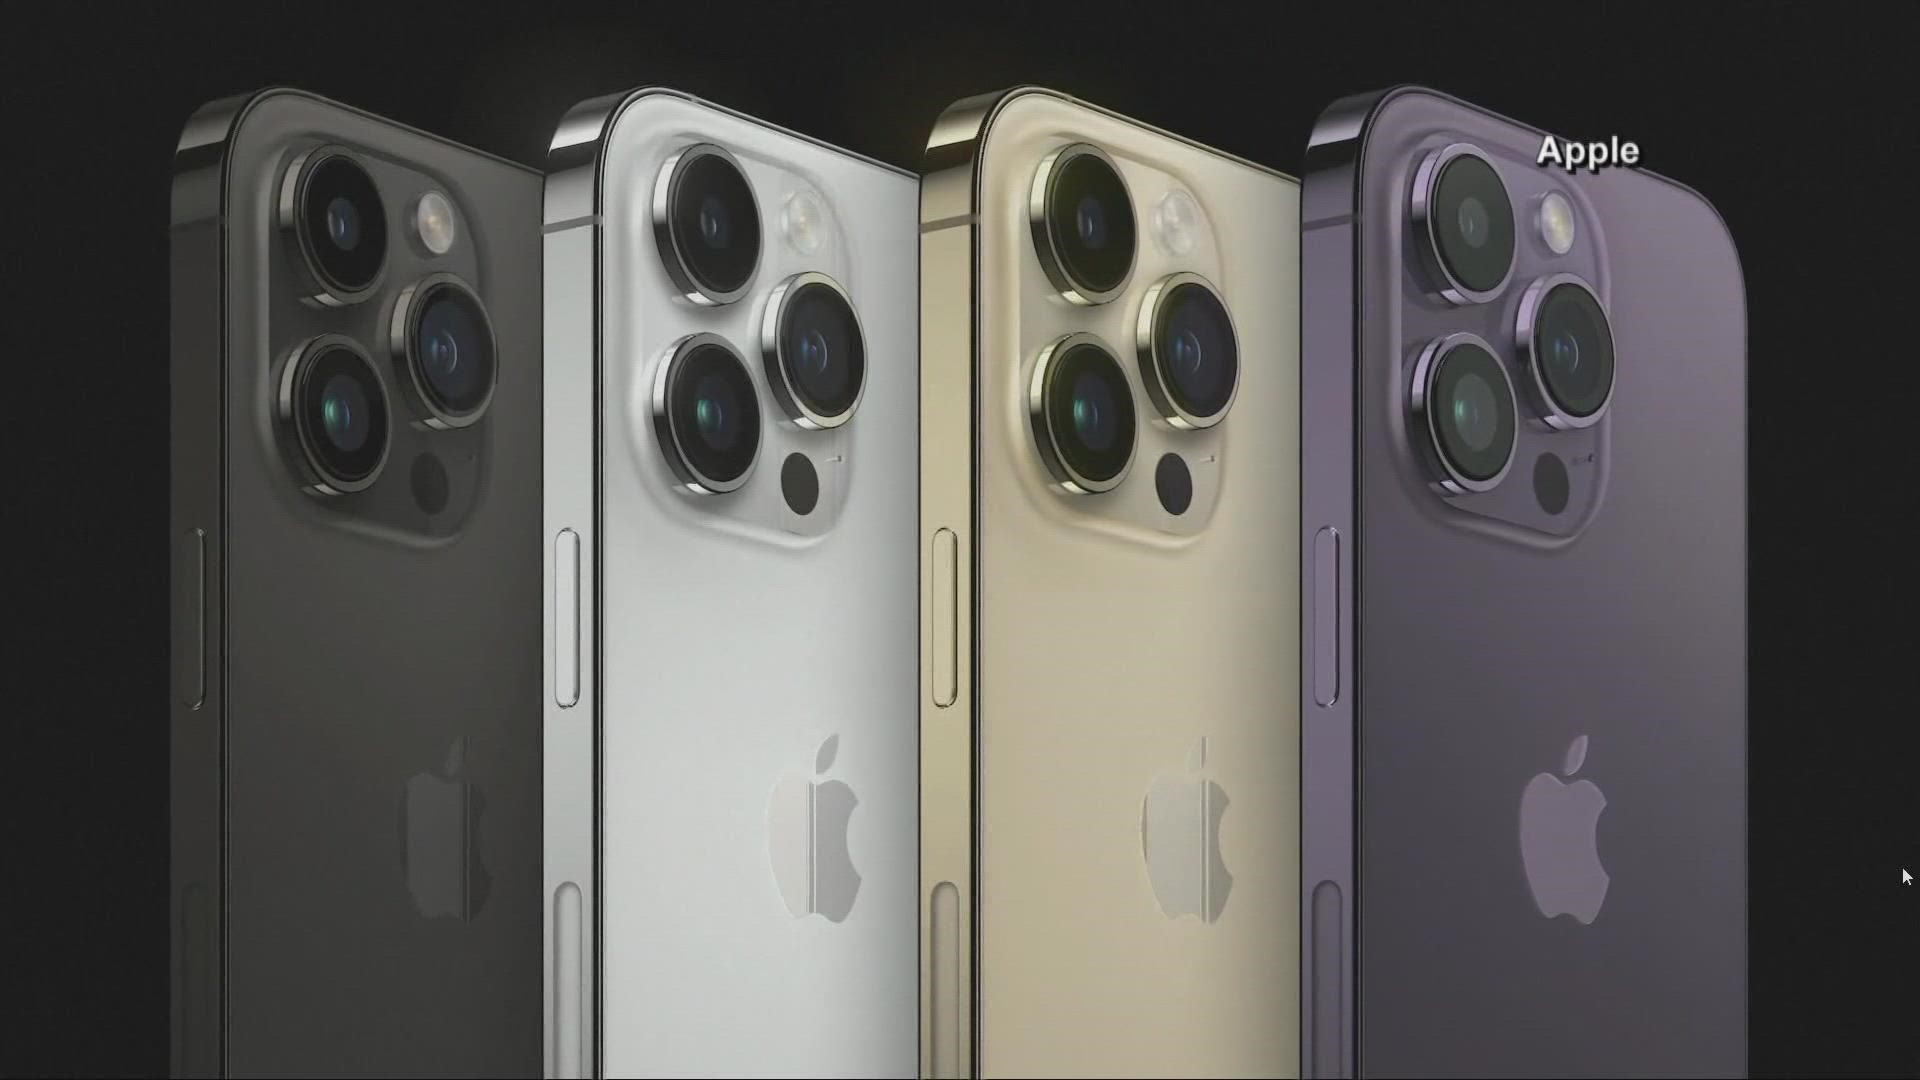 The new Apple iPhone 14 & 14 Pro are now available around the world.  The iPhone has a longer battery life, updated camera sensors and an improved front-facing cam.